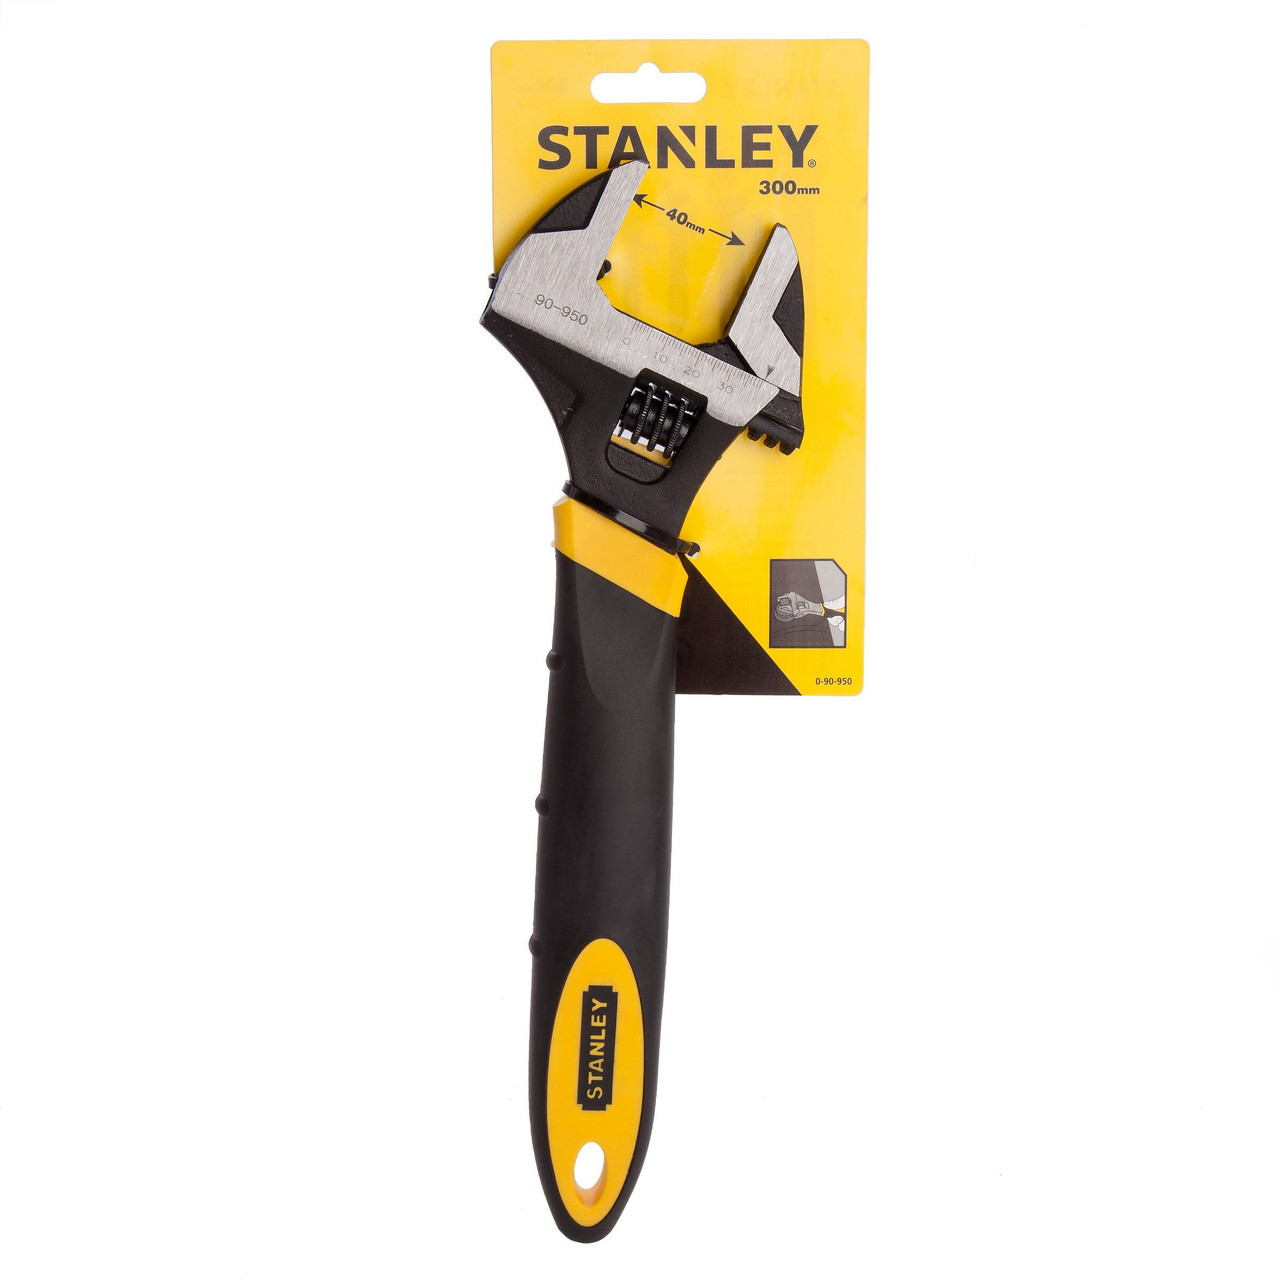 Stanley 0-90-950 MaxSteel Adjustable / 300mm 12in Wrench